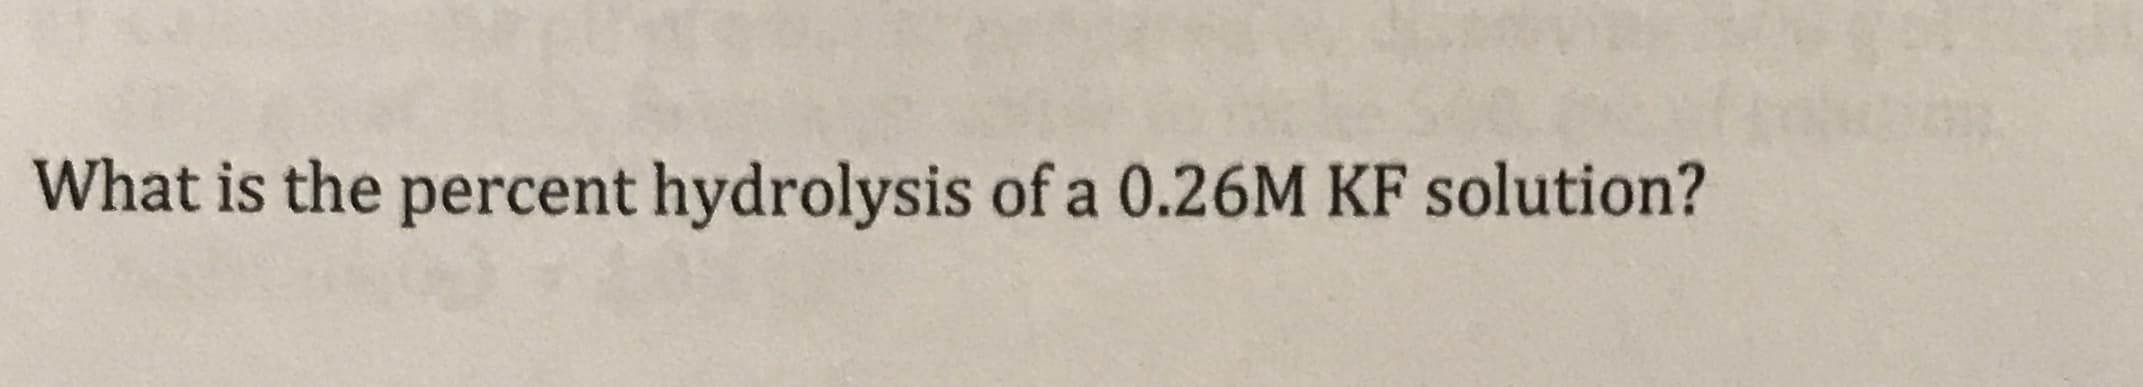 What is the percent hydrolysis of a 0.26M KF solution?
